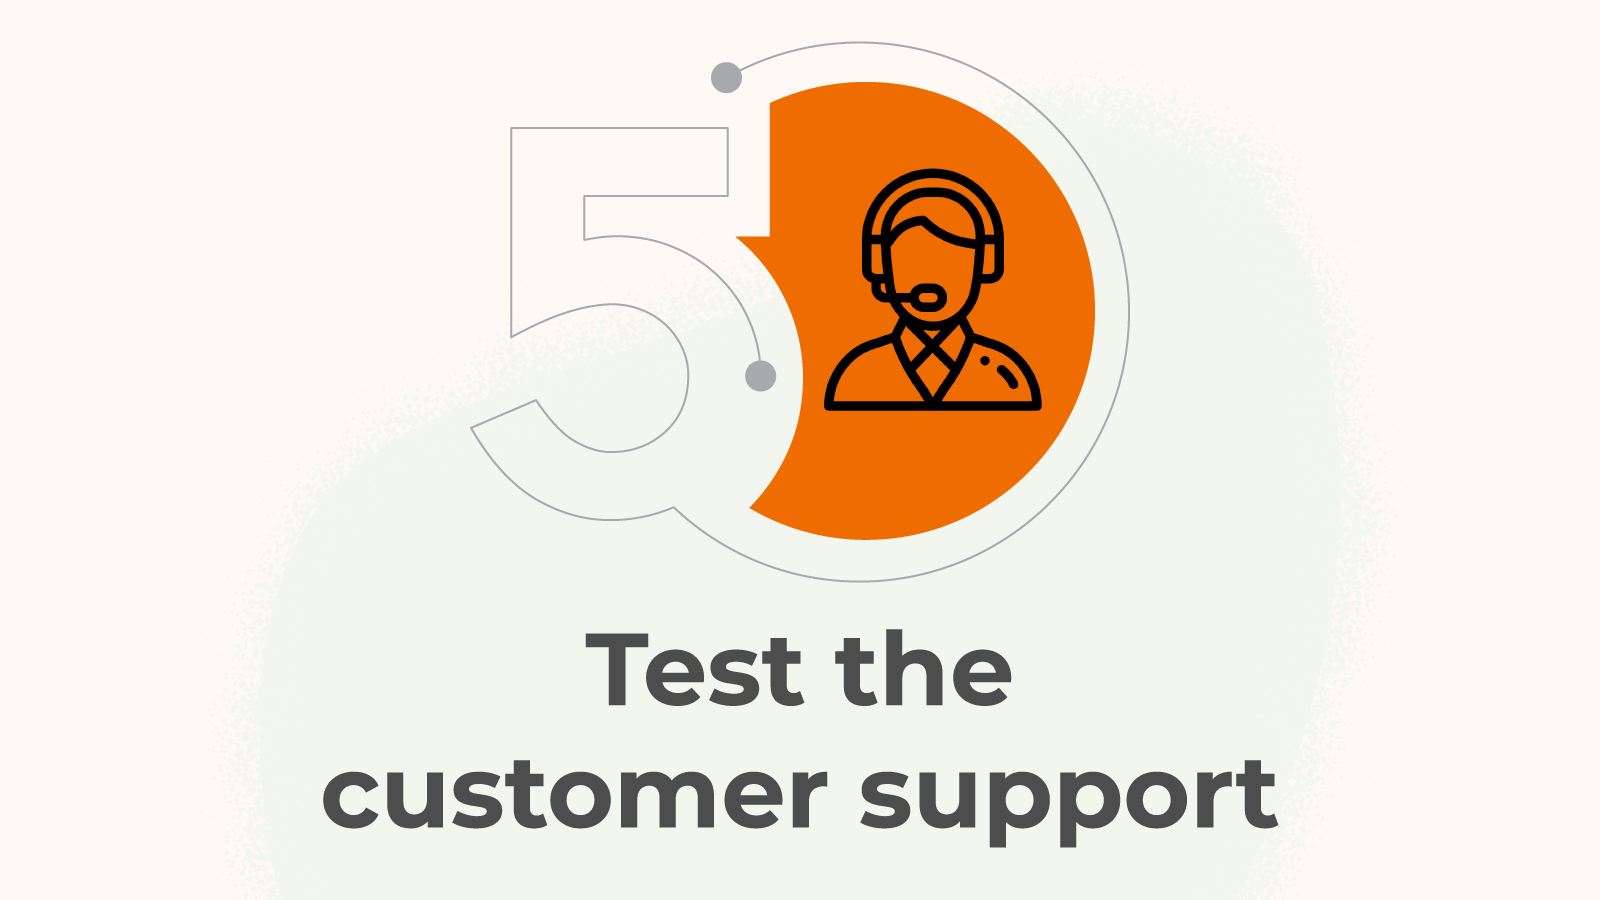 Test the customer support